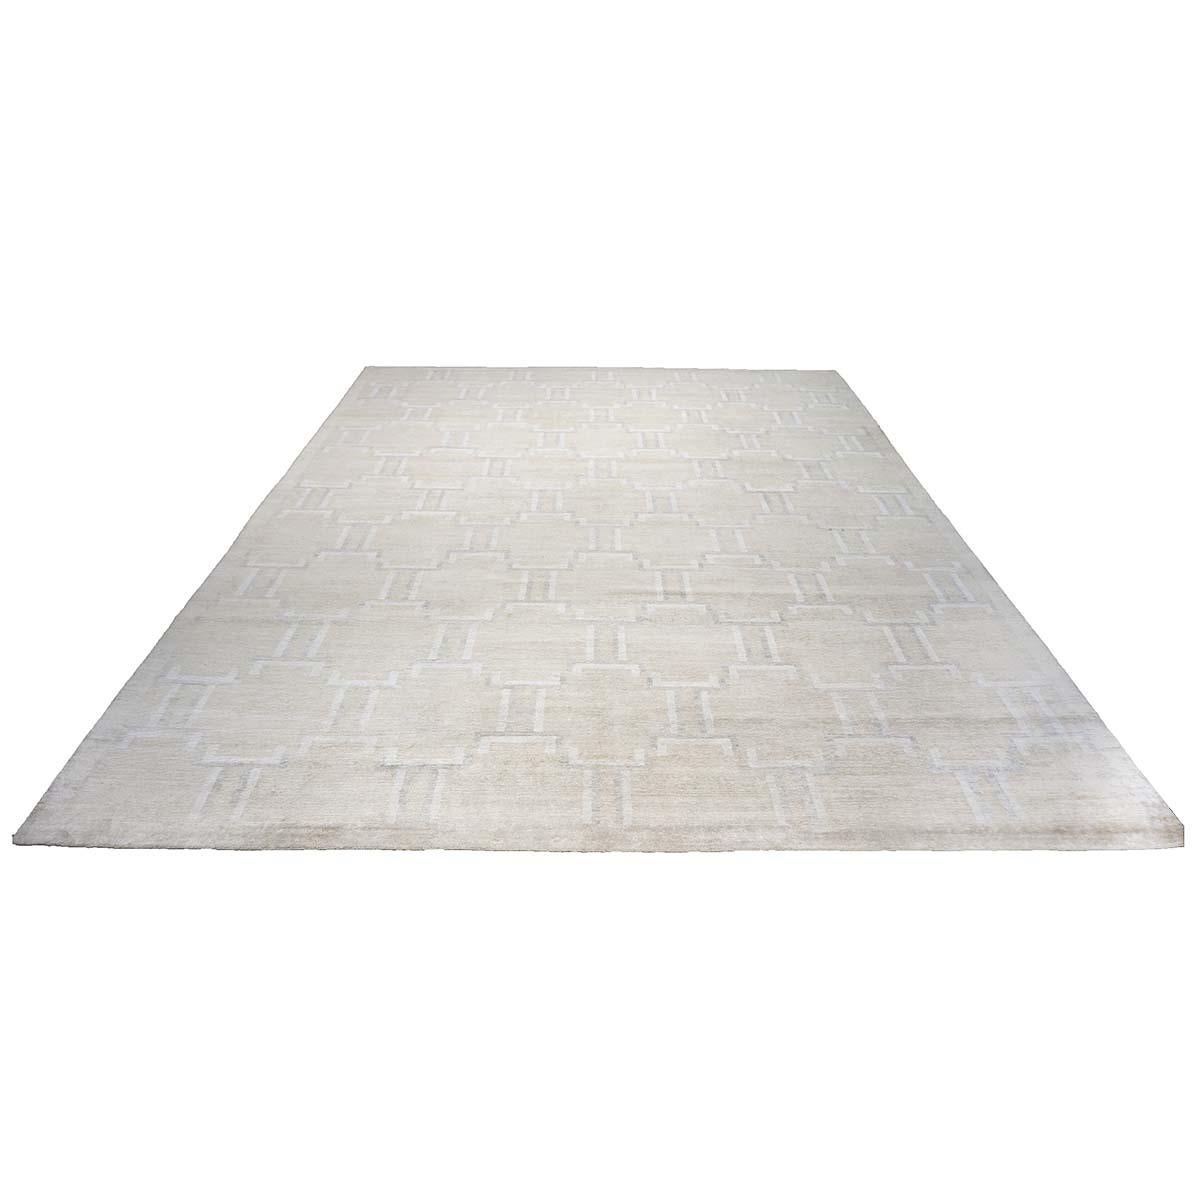 Ashly Fine Rugs presents a New Modern Inspired wool & silk 12x15 Beige, Ivory, & Grey Handmade Area Rug with lustrous shiny fibers and a thick durable pile. This gorgeous collection has been designed by our in-house designer and was 100% handmade by